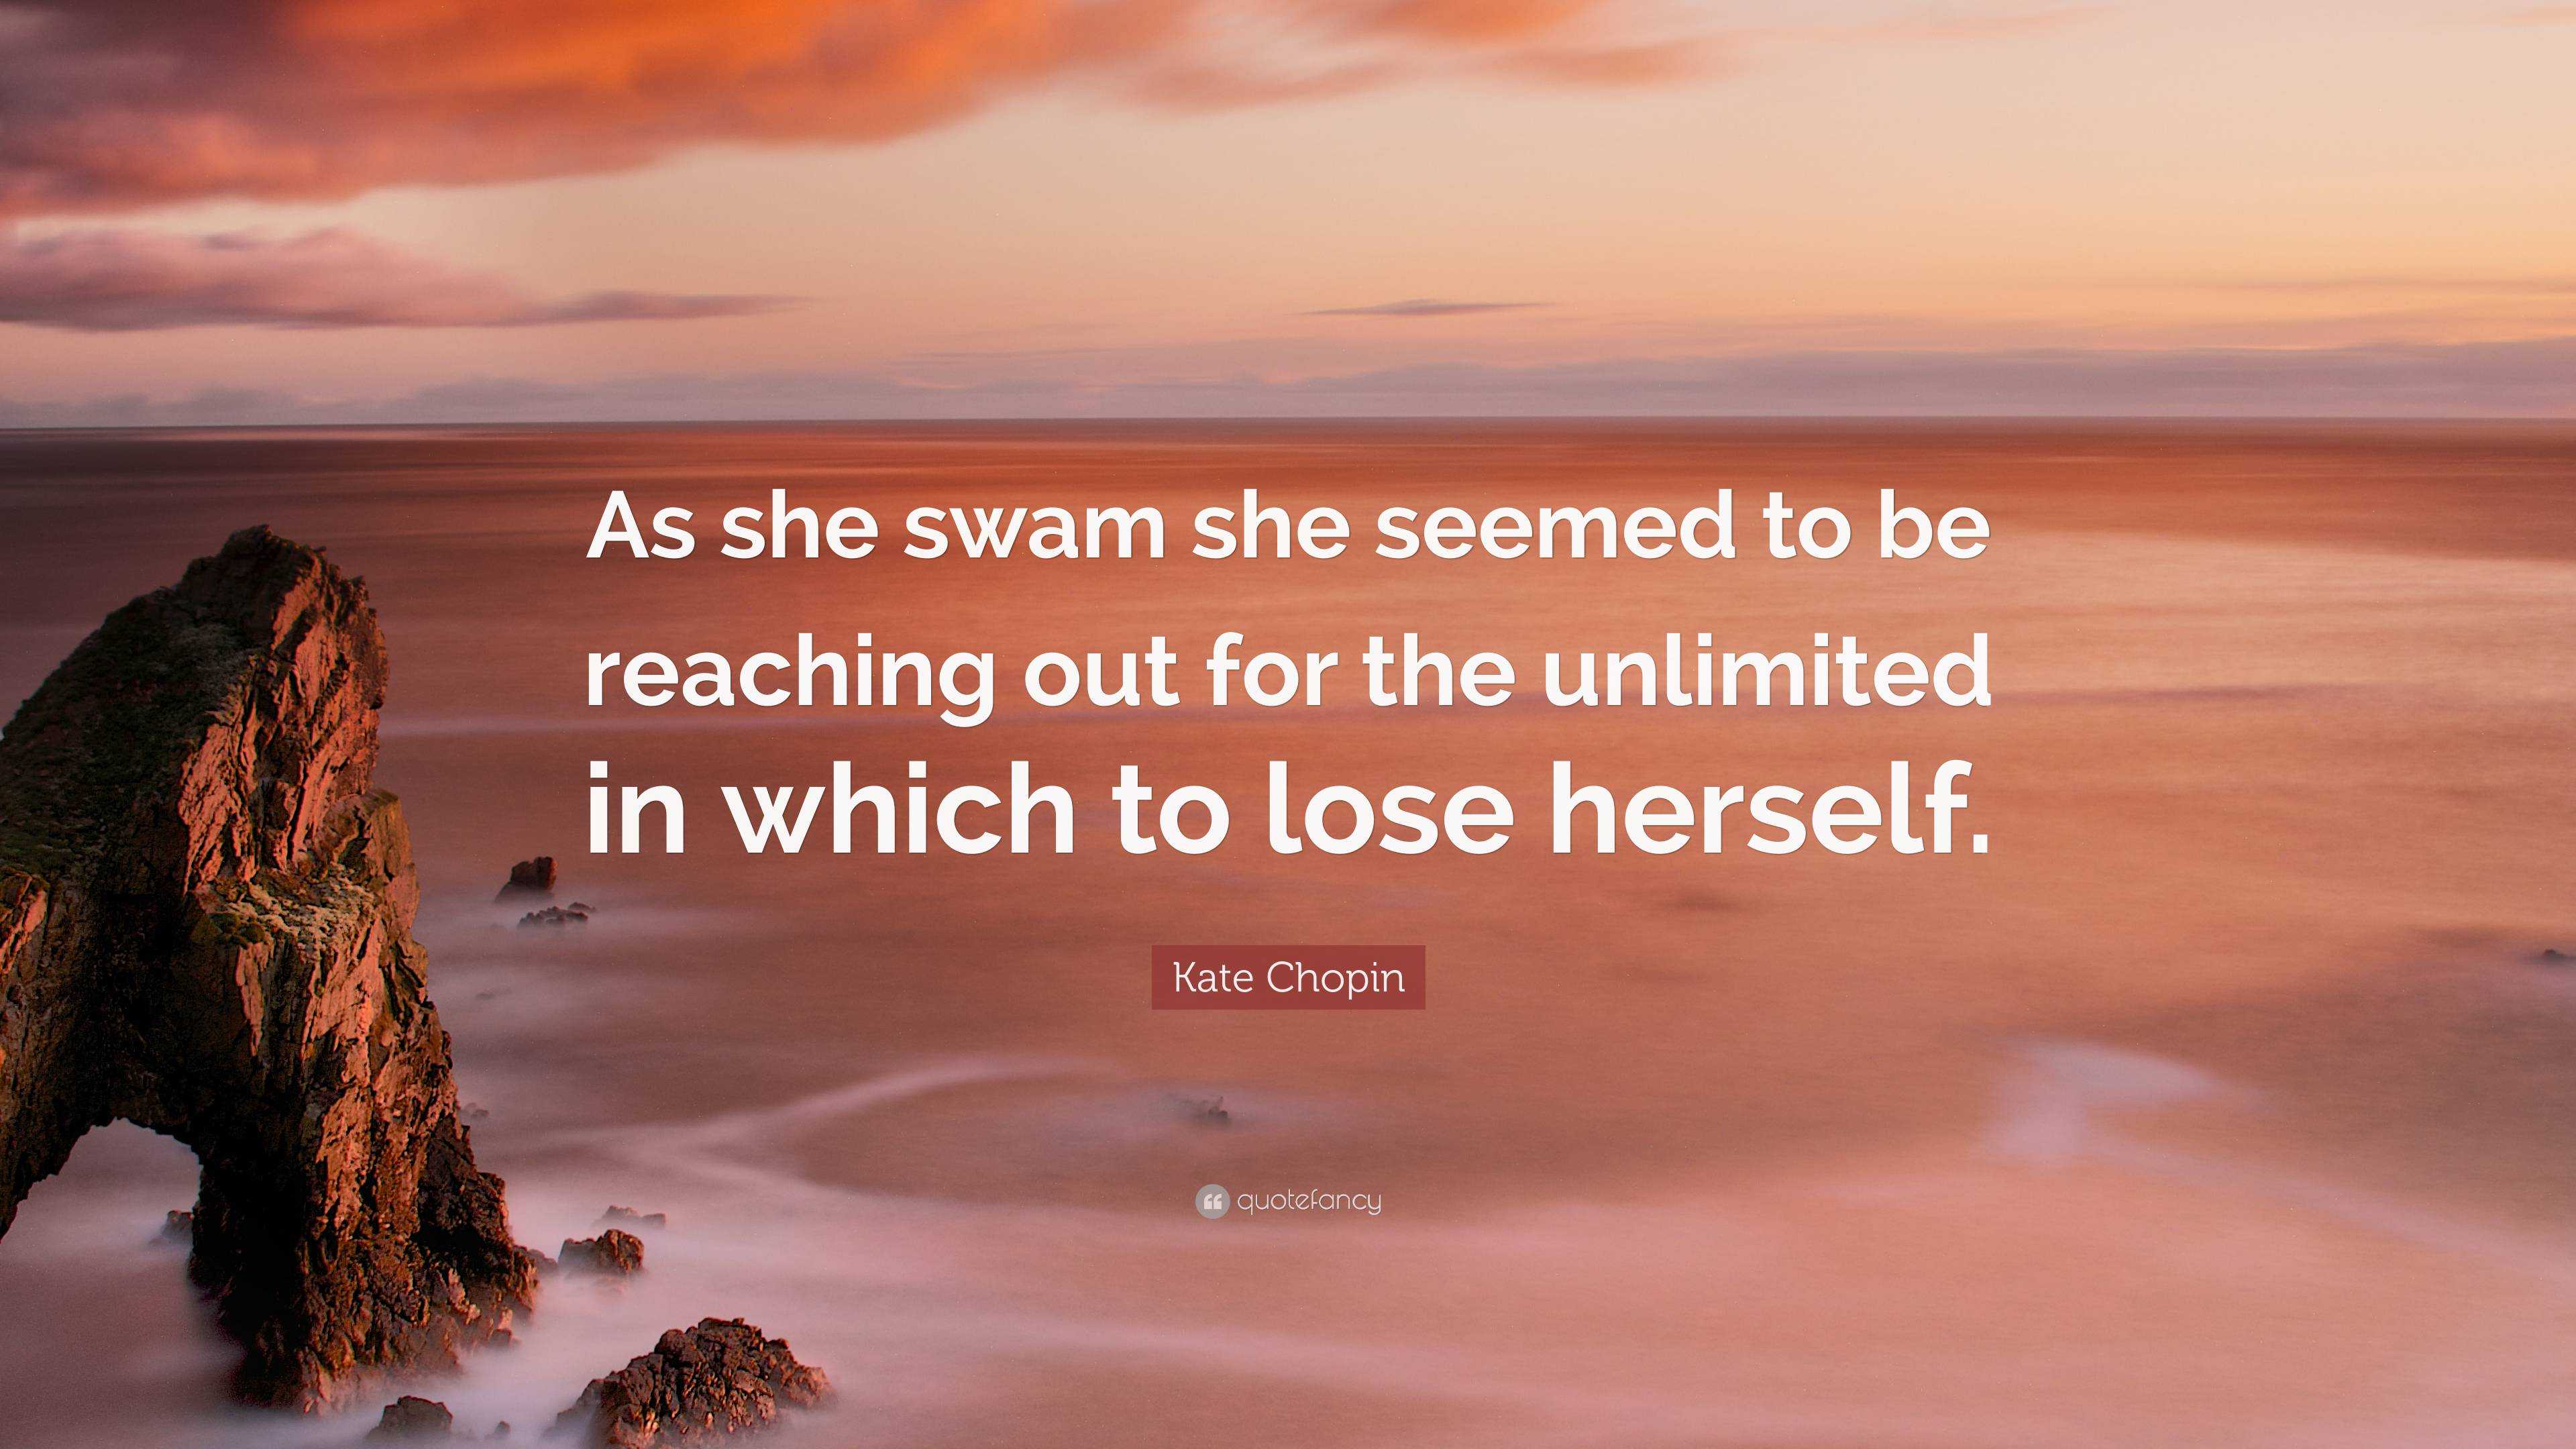 Kate Chopin Quote: “As she swam she seemed to be reaching out for the ...